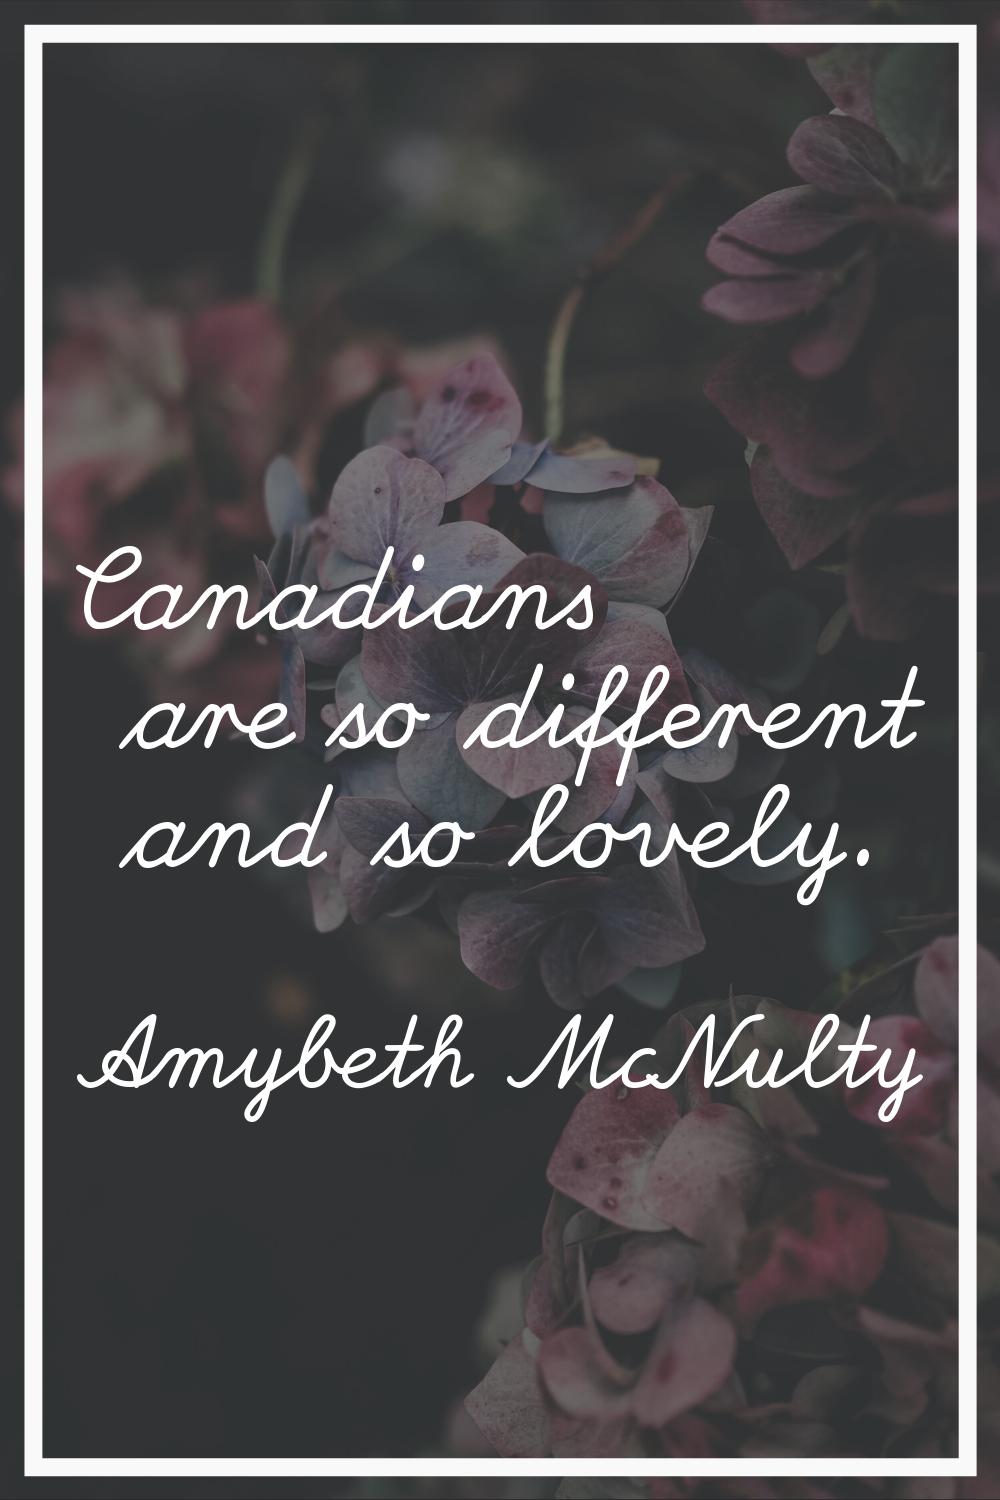 Canadians are so different and so lovely.